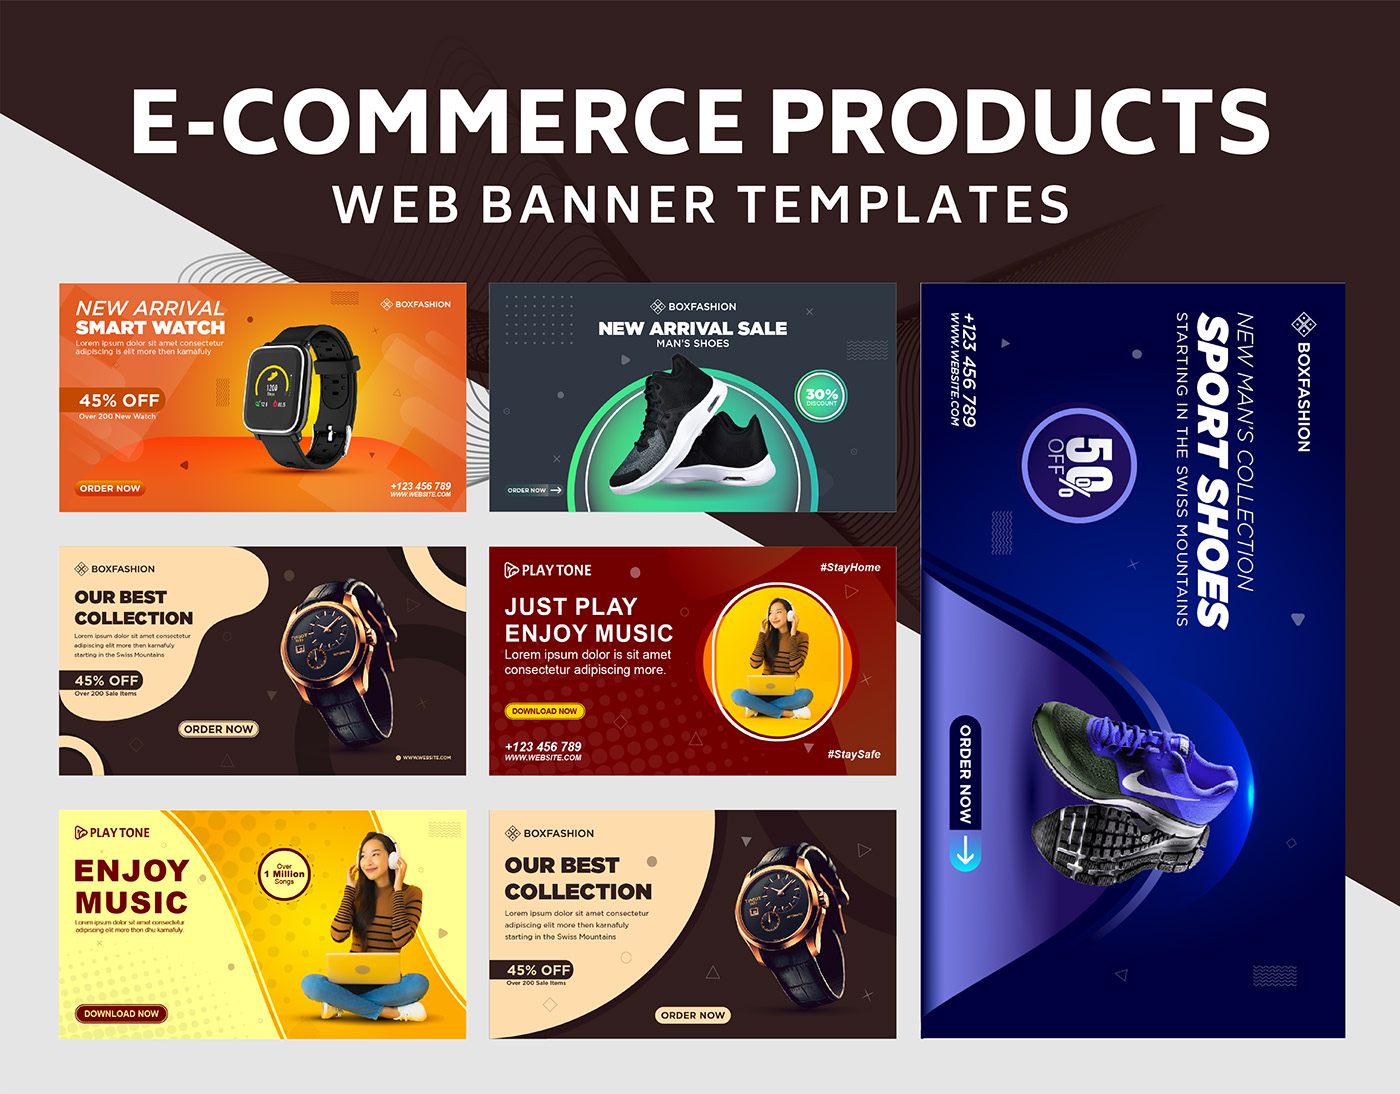 E-Commerce Products Web Banner Template Free Download on Behance Regarding Product Banner Template